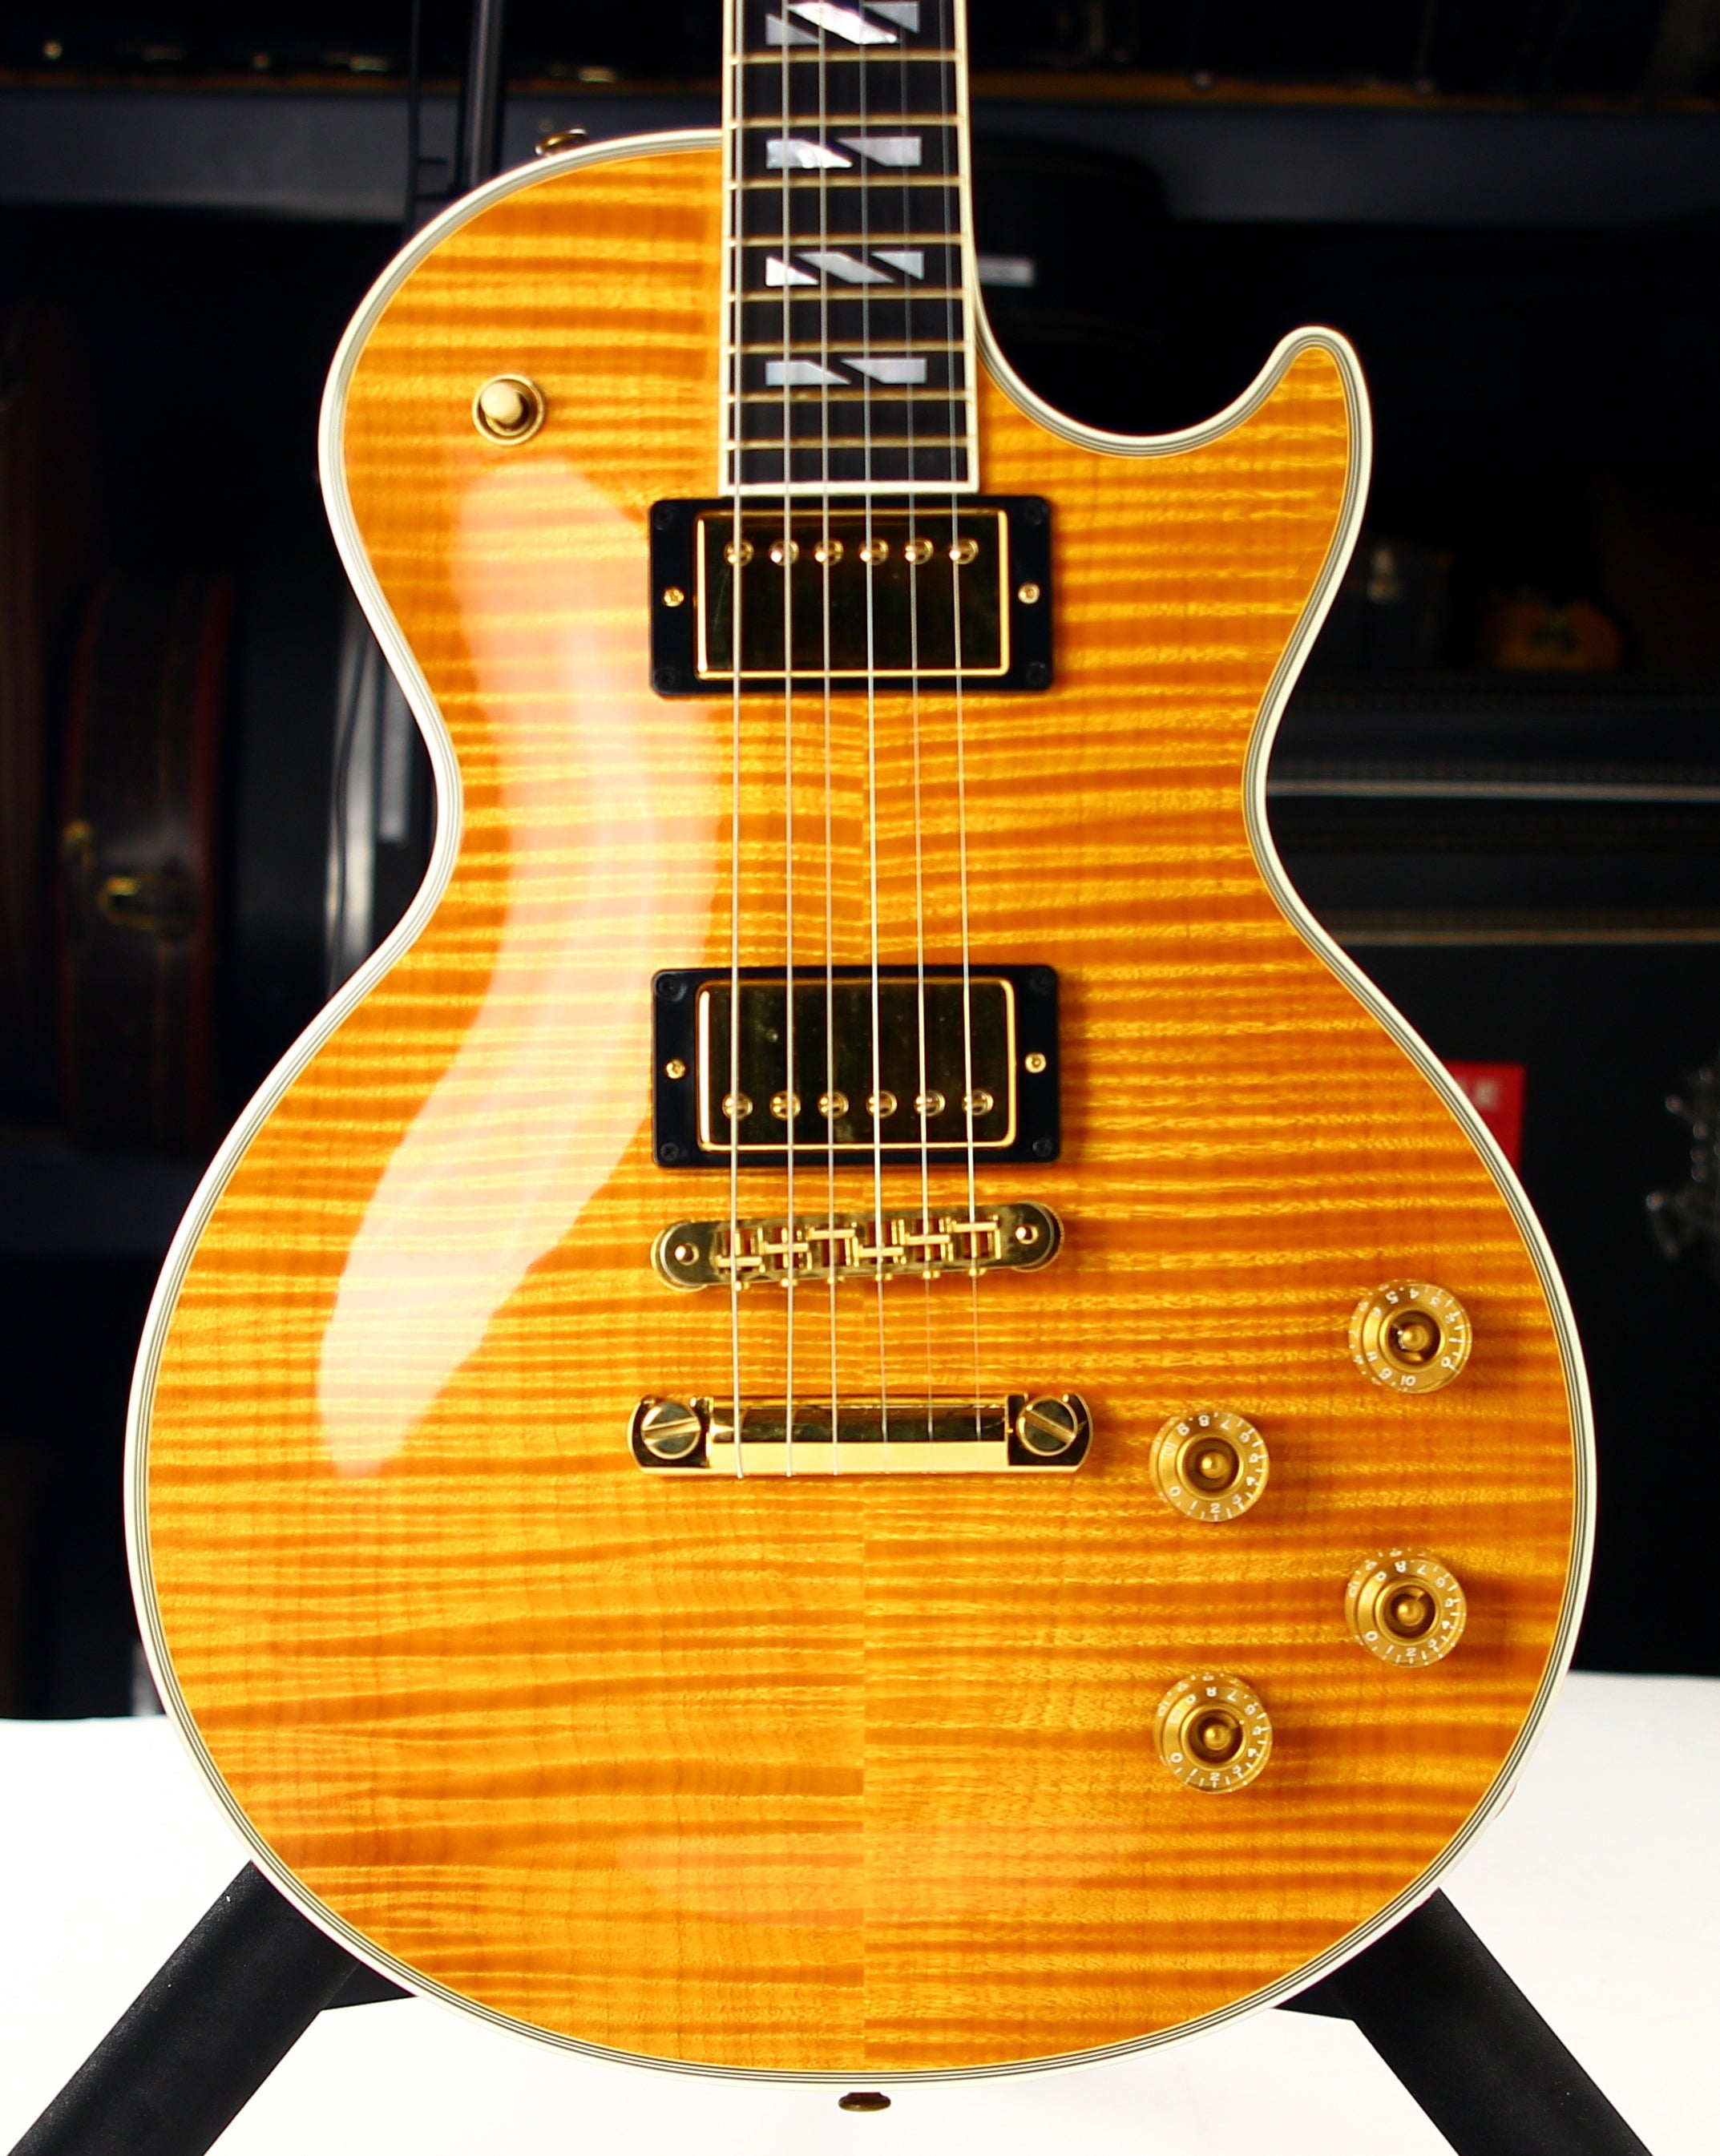 *SOLD*  2003 Gibson Les Paul Supreme Trans Amber KILLER Flame Top and Back - Ebony Fretboard - Super 400 Custom Inlays!